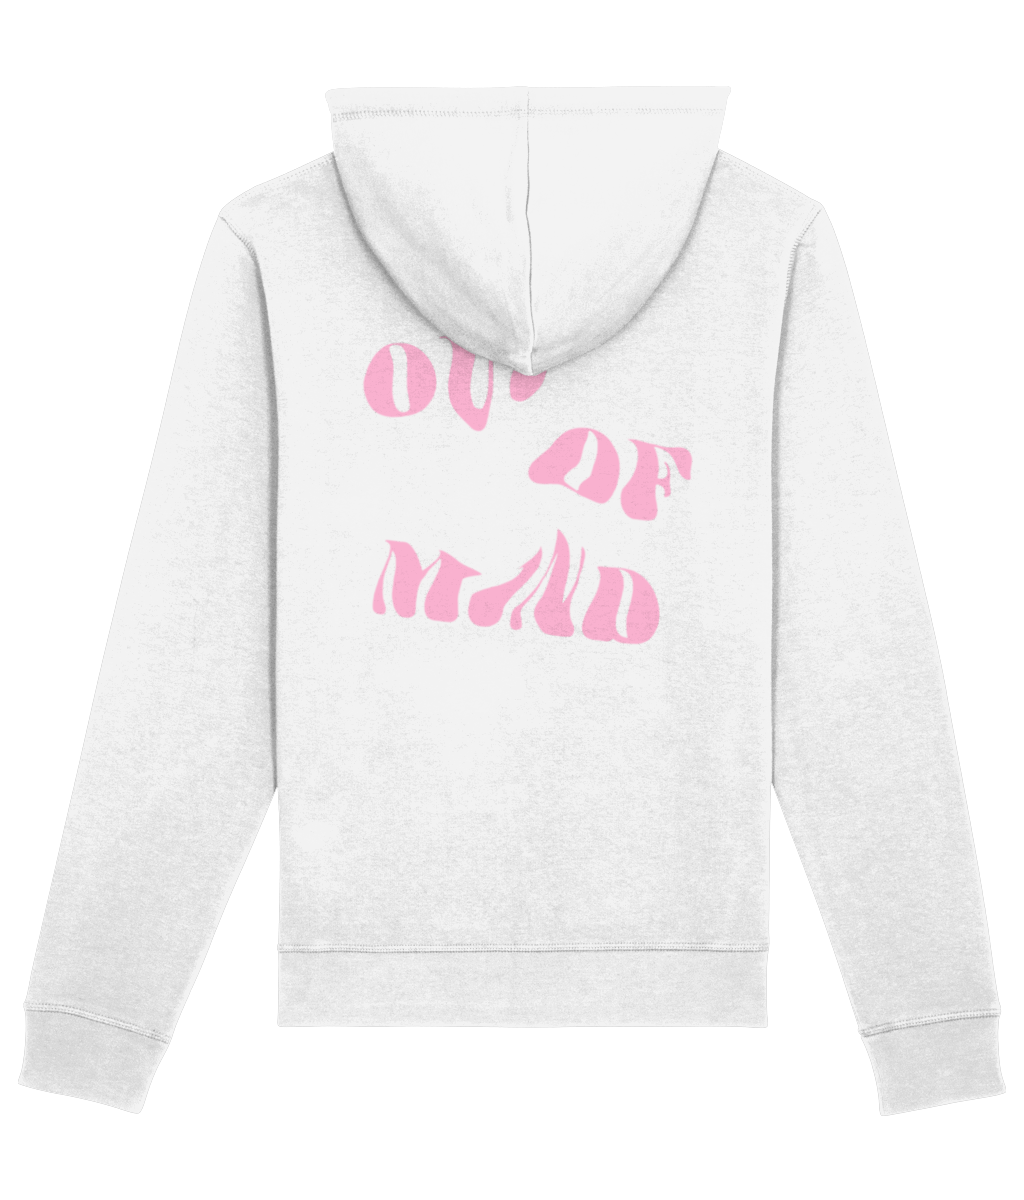 OUT OF MIND HOODIE (LIGHT PINK)